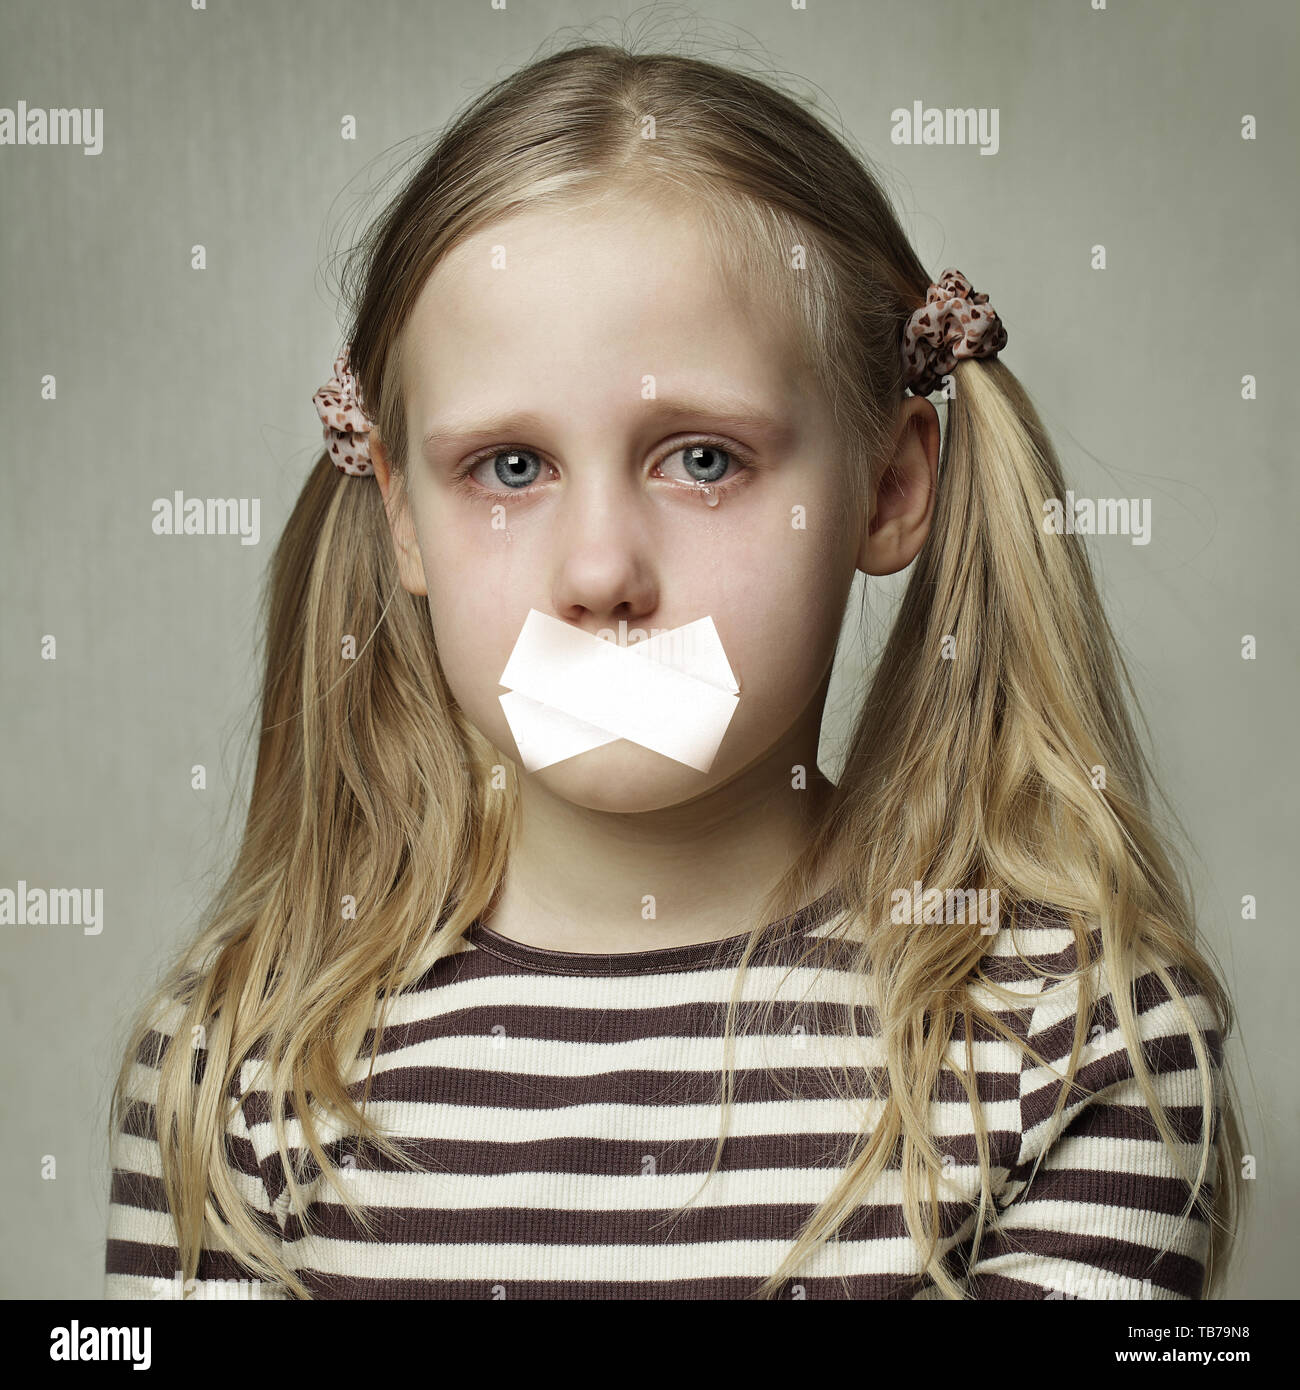 Sad Teenager With Sealed Mouth. Child with tears - young girl crying Stock Photo